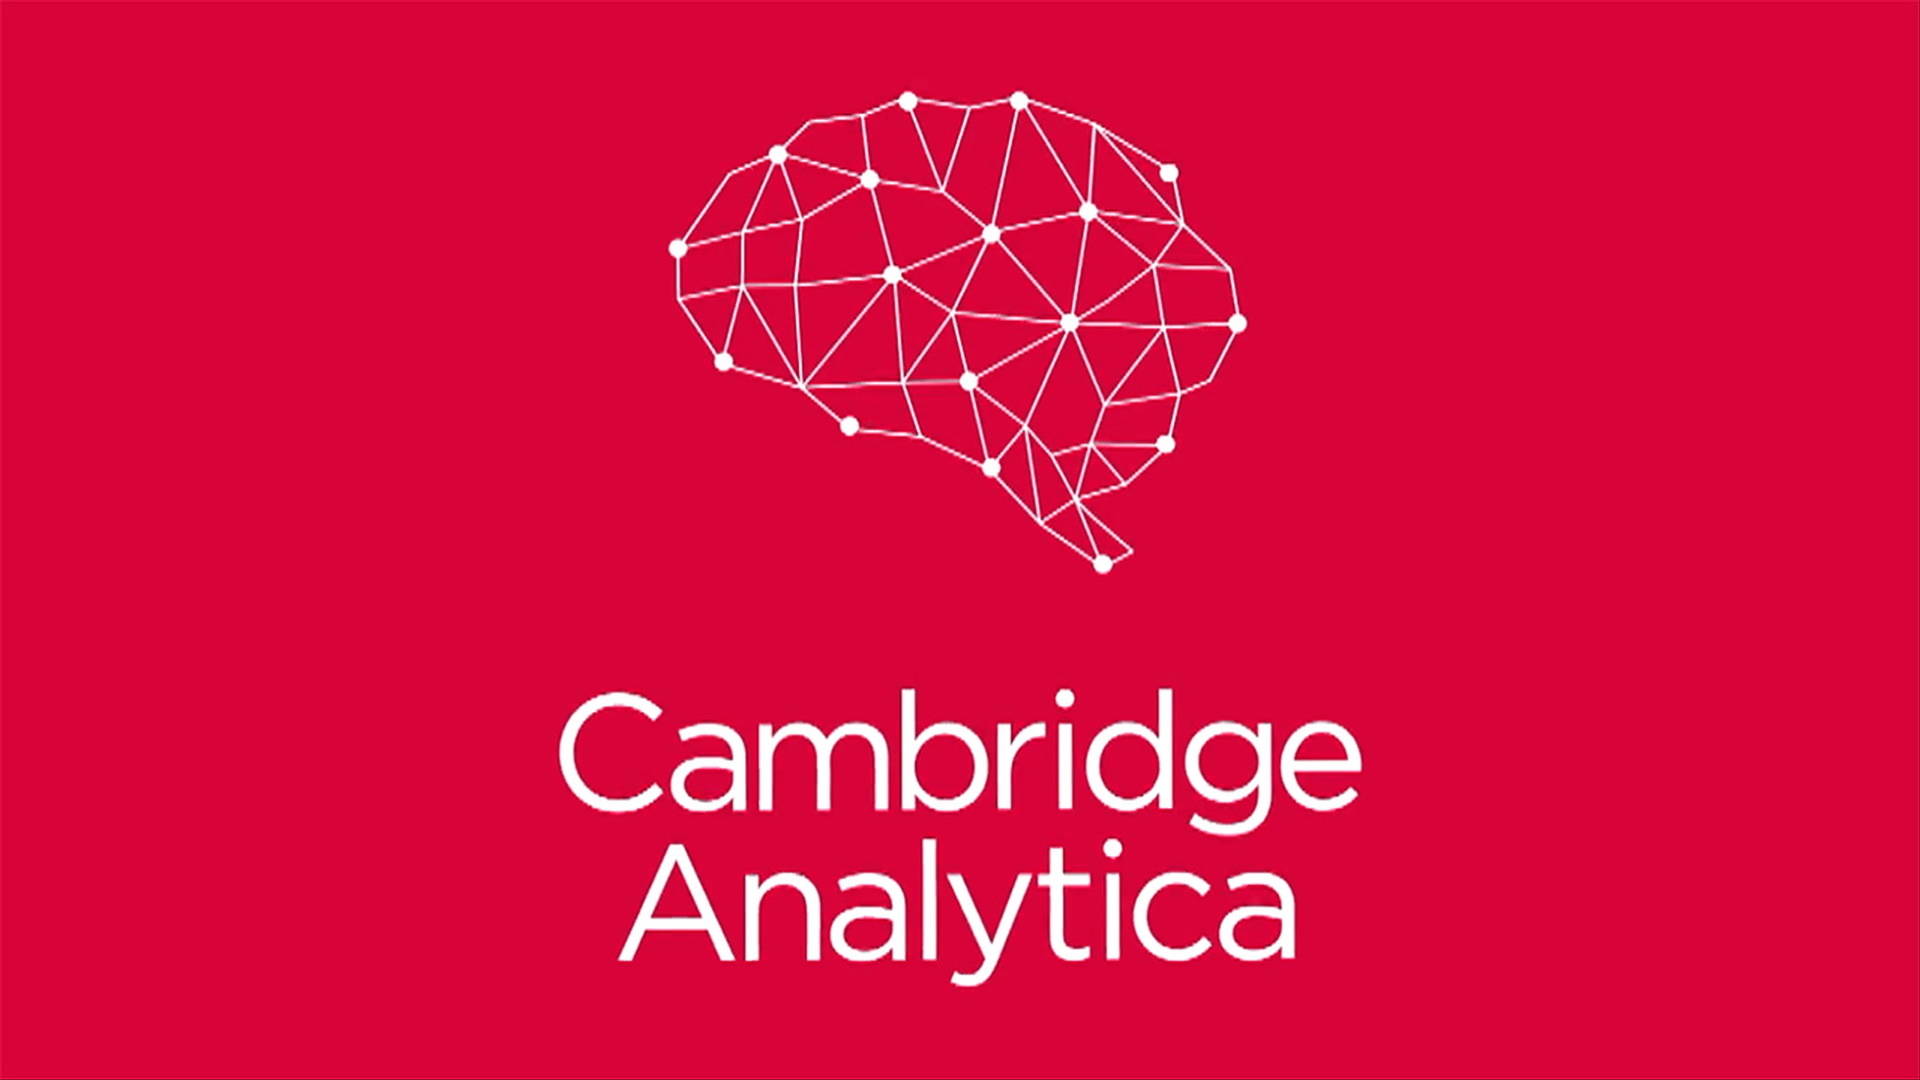 Everything about Facebook v Cambridge Analytica in 2 minutes